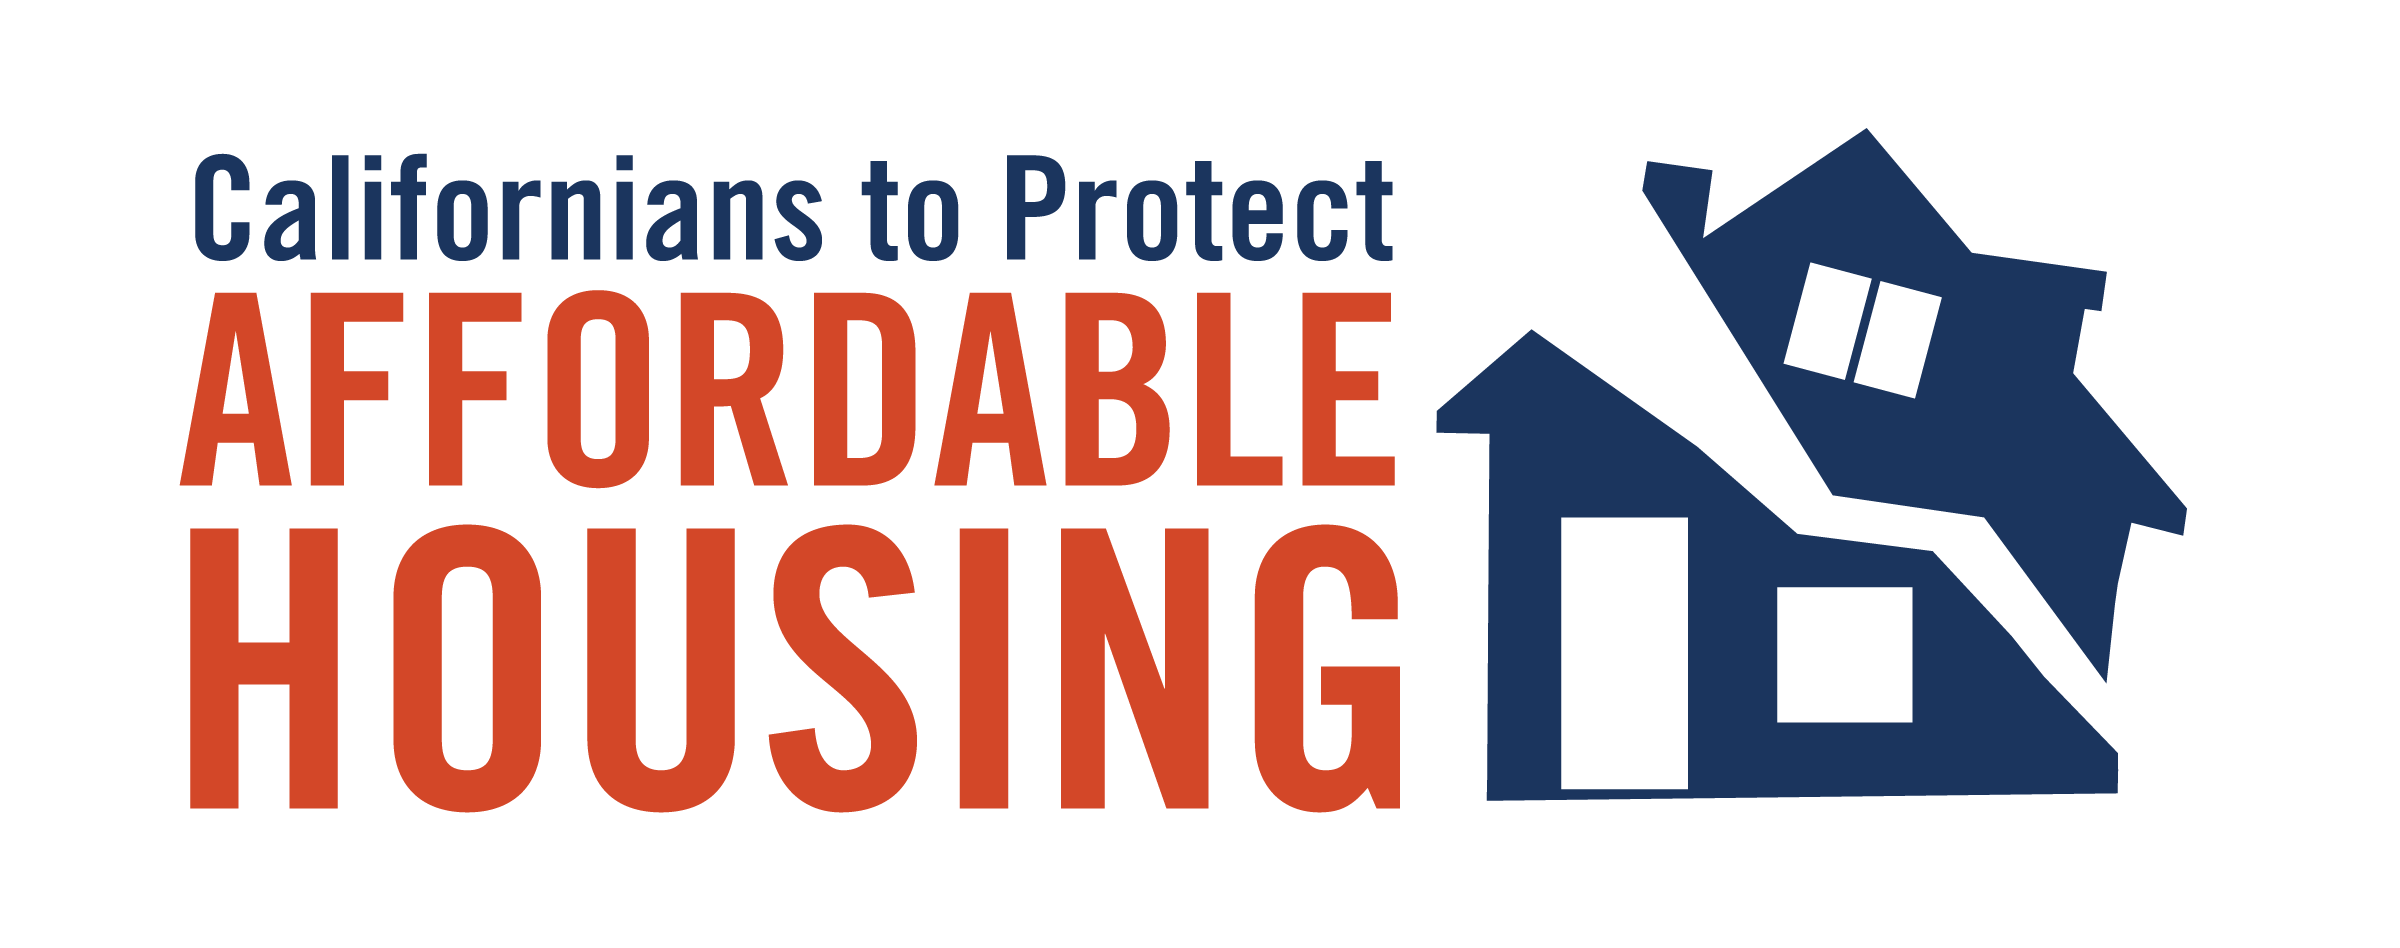 Californians to Protect Affordable Housing